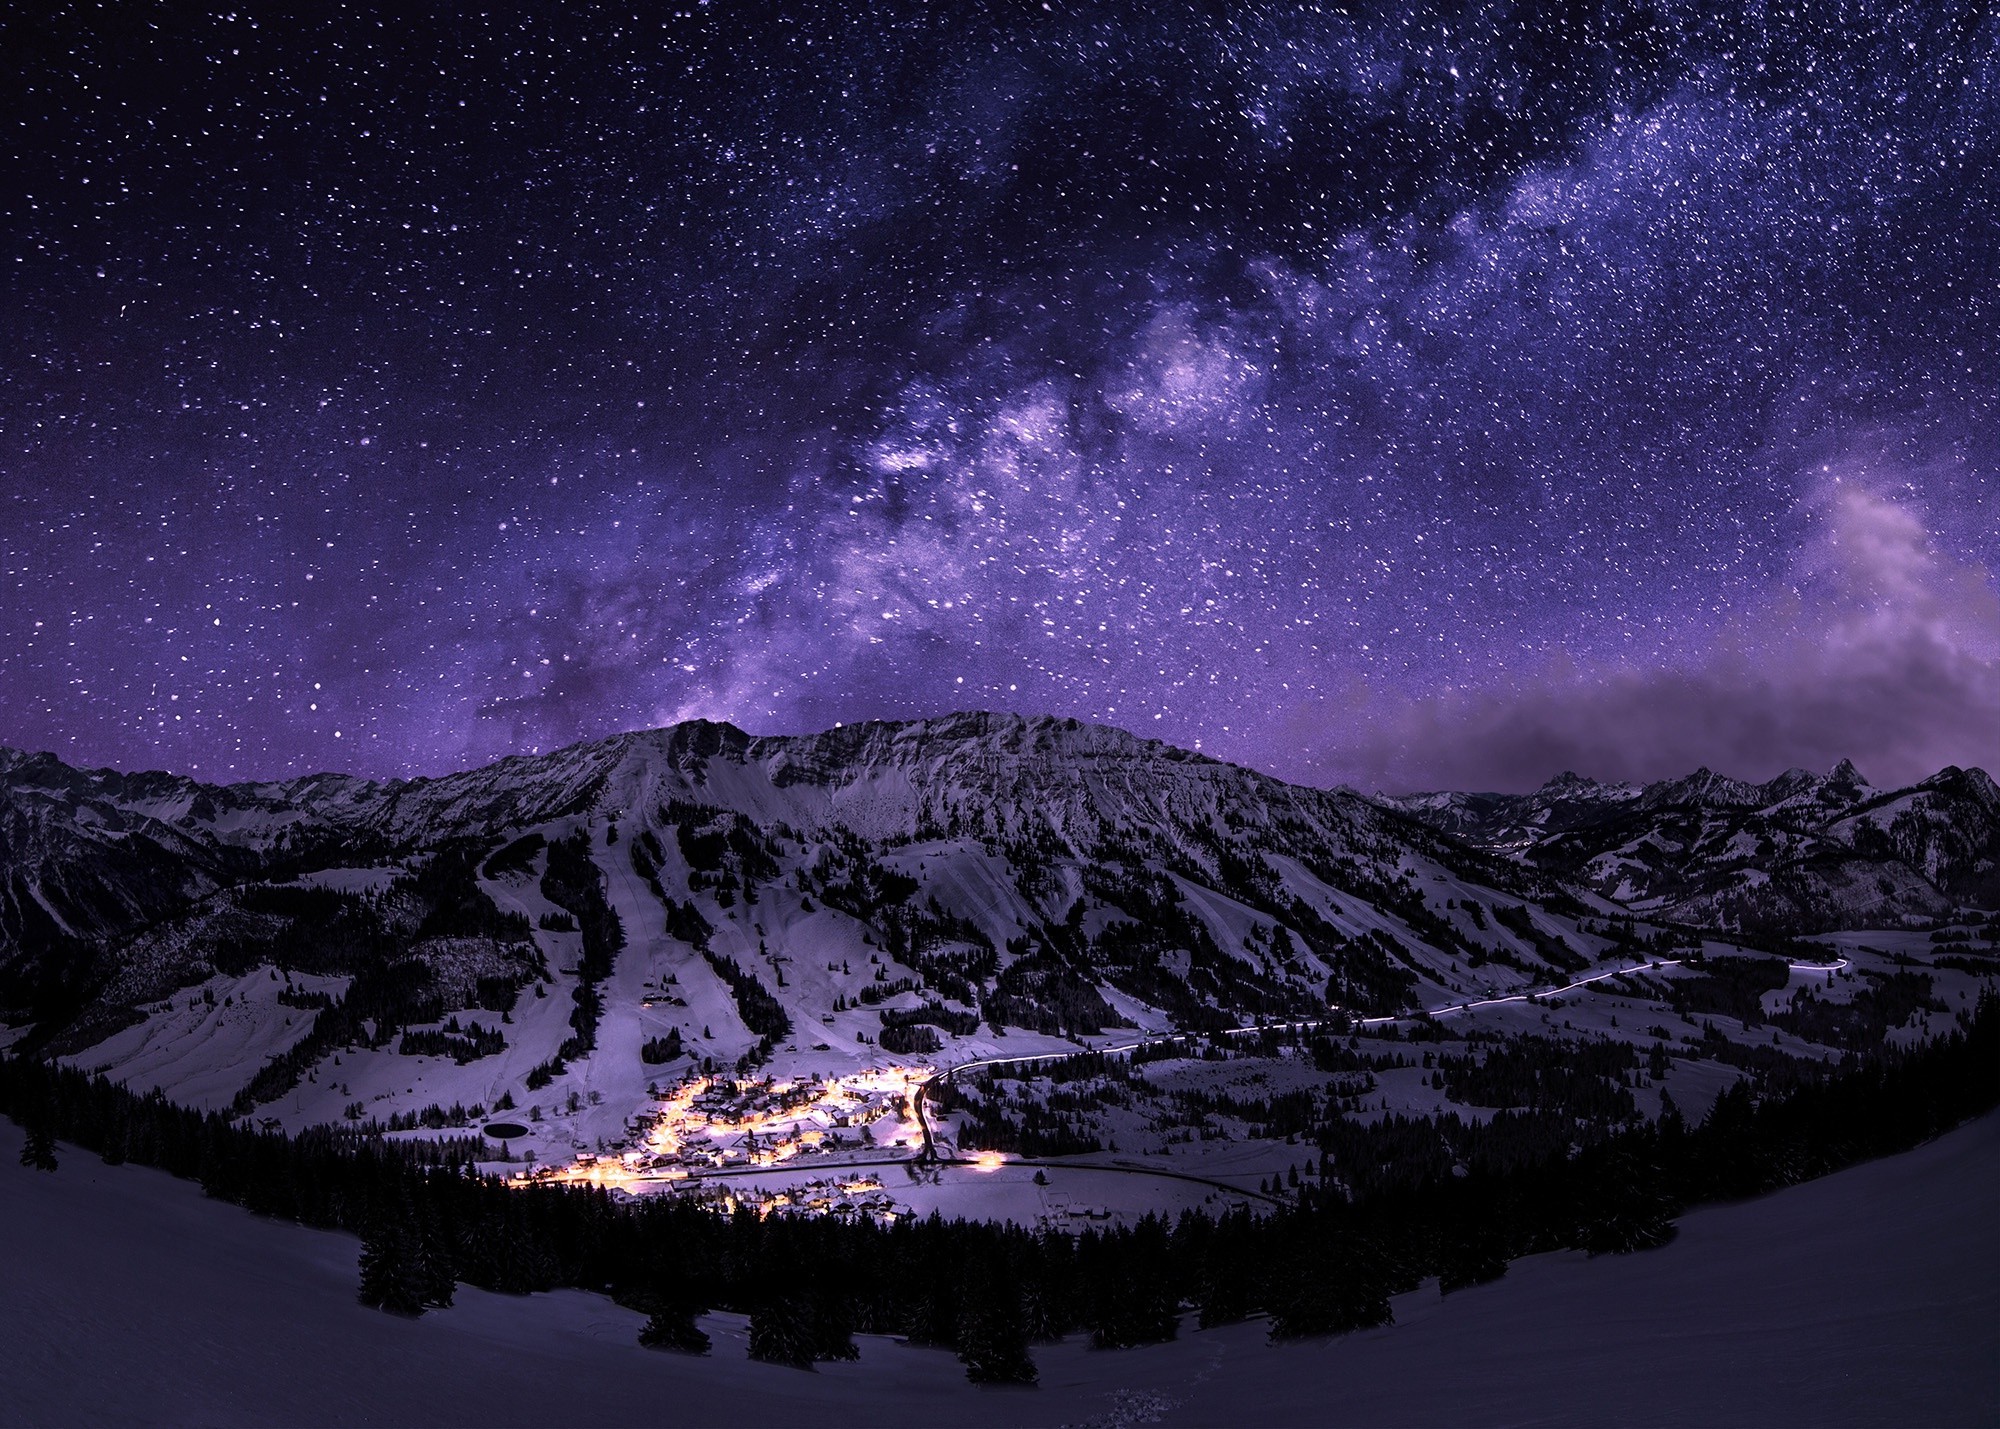 Download Wallpaper 3840x2160 Mountain Night Starry Sk - vrogue.co